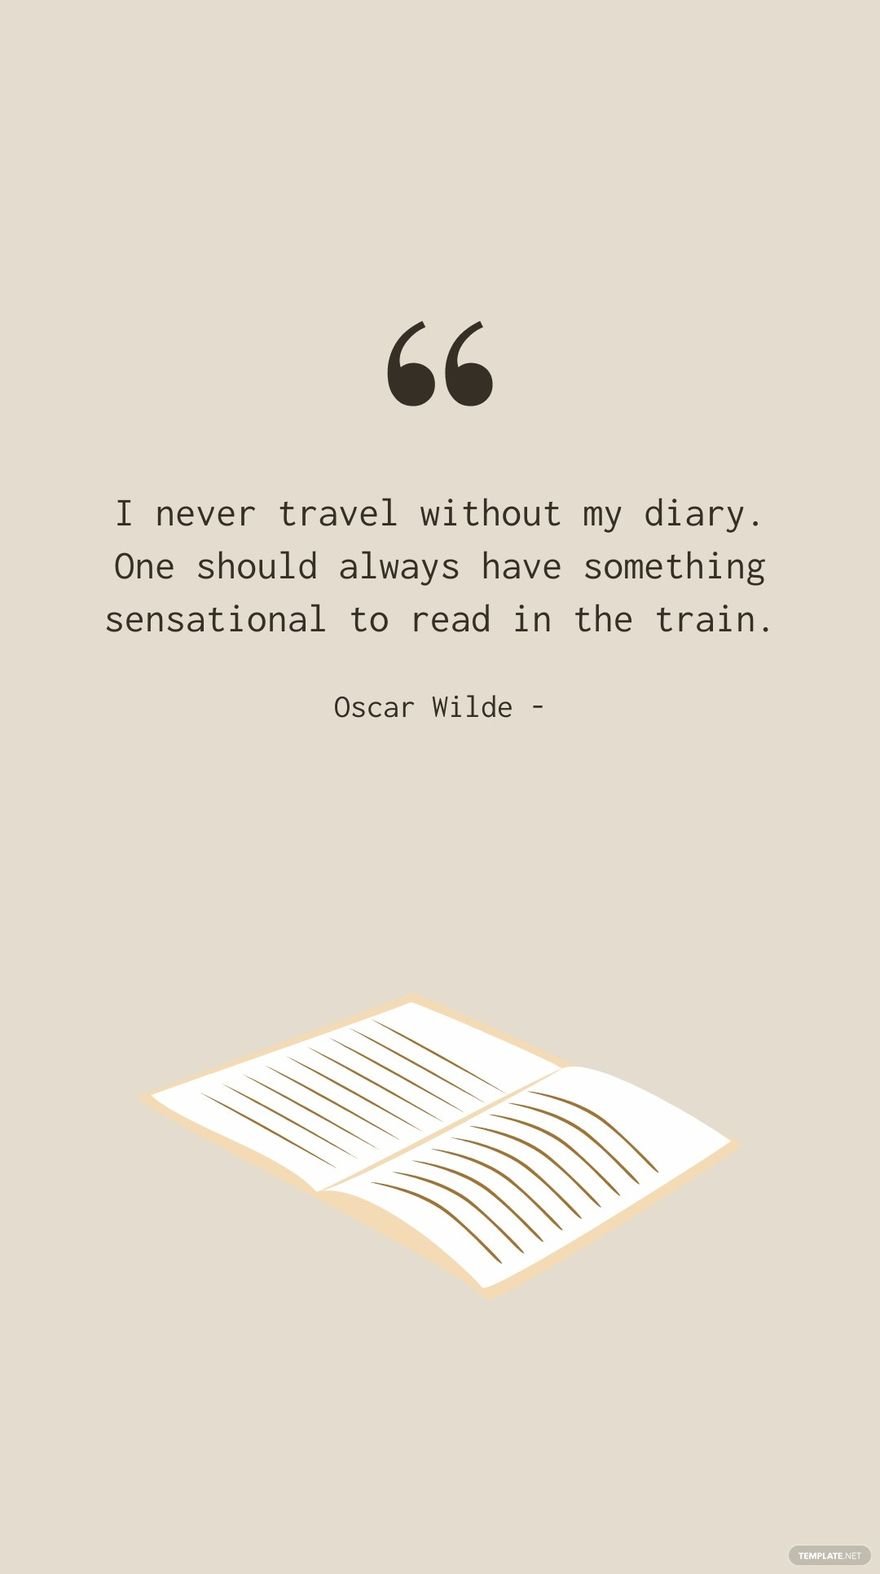 Oscar Wilde - I never travel without my diary. One should always have something sensational to read in the train.